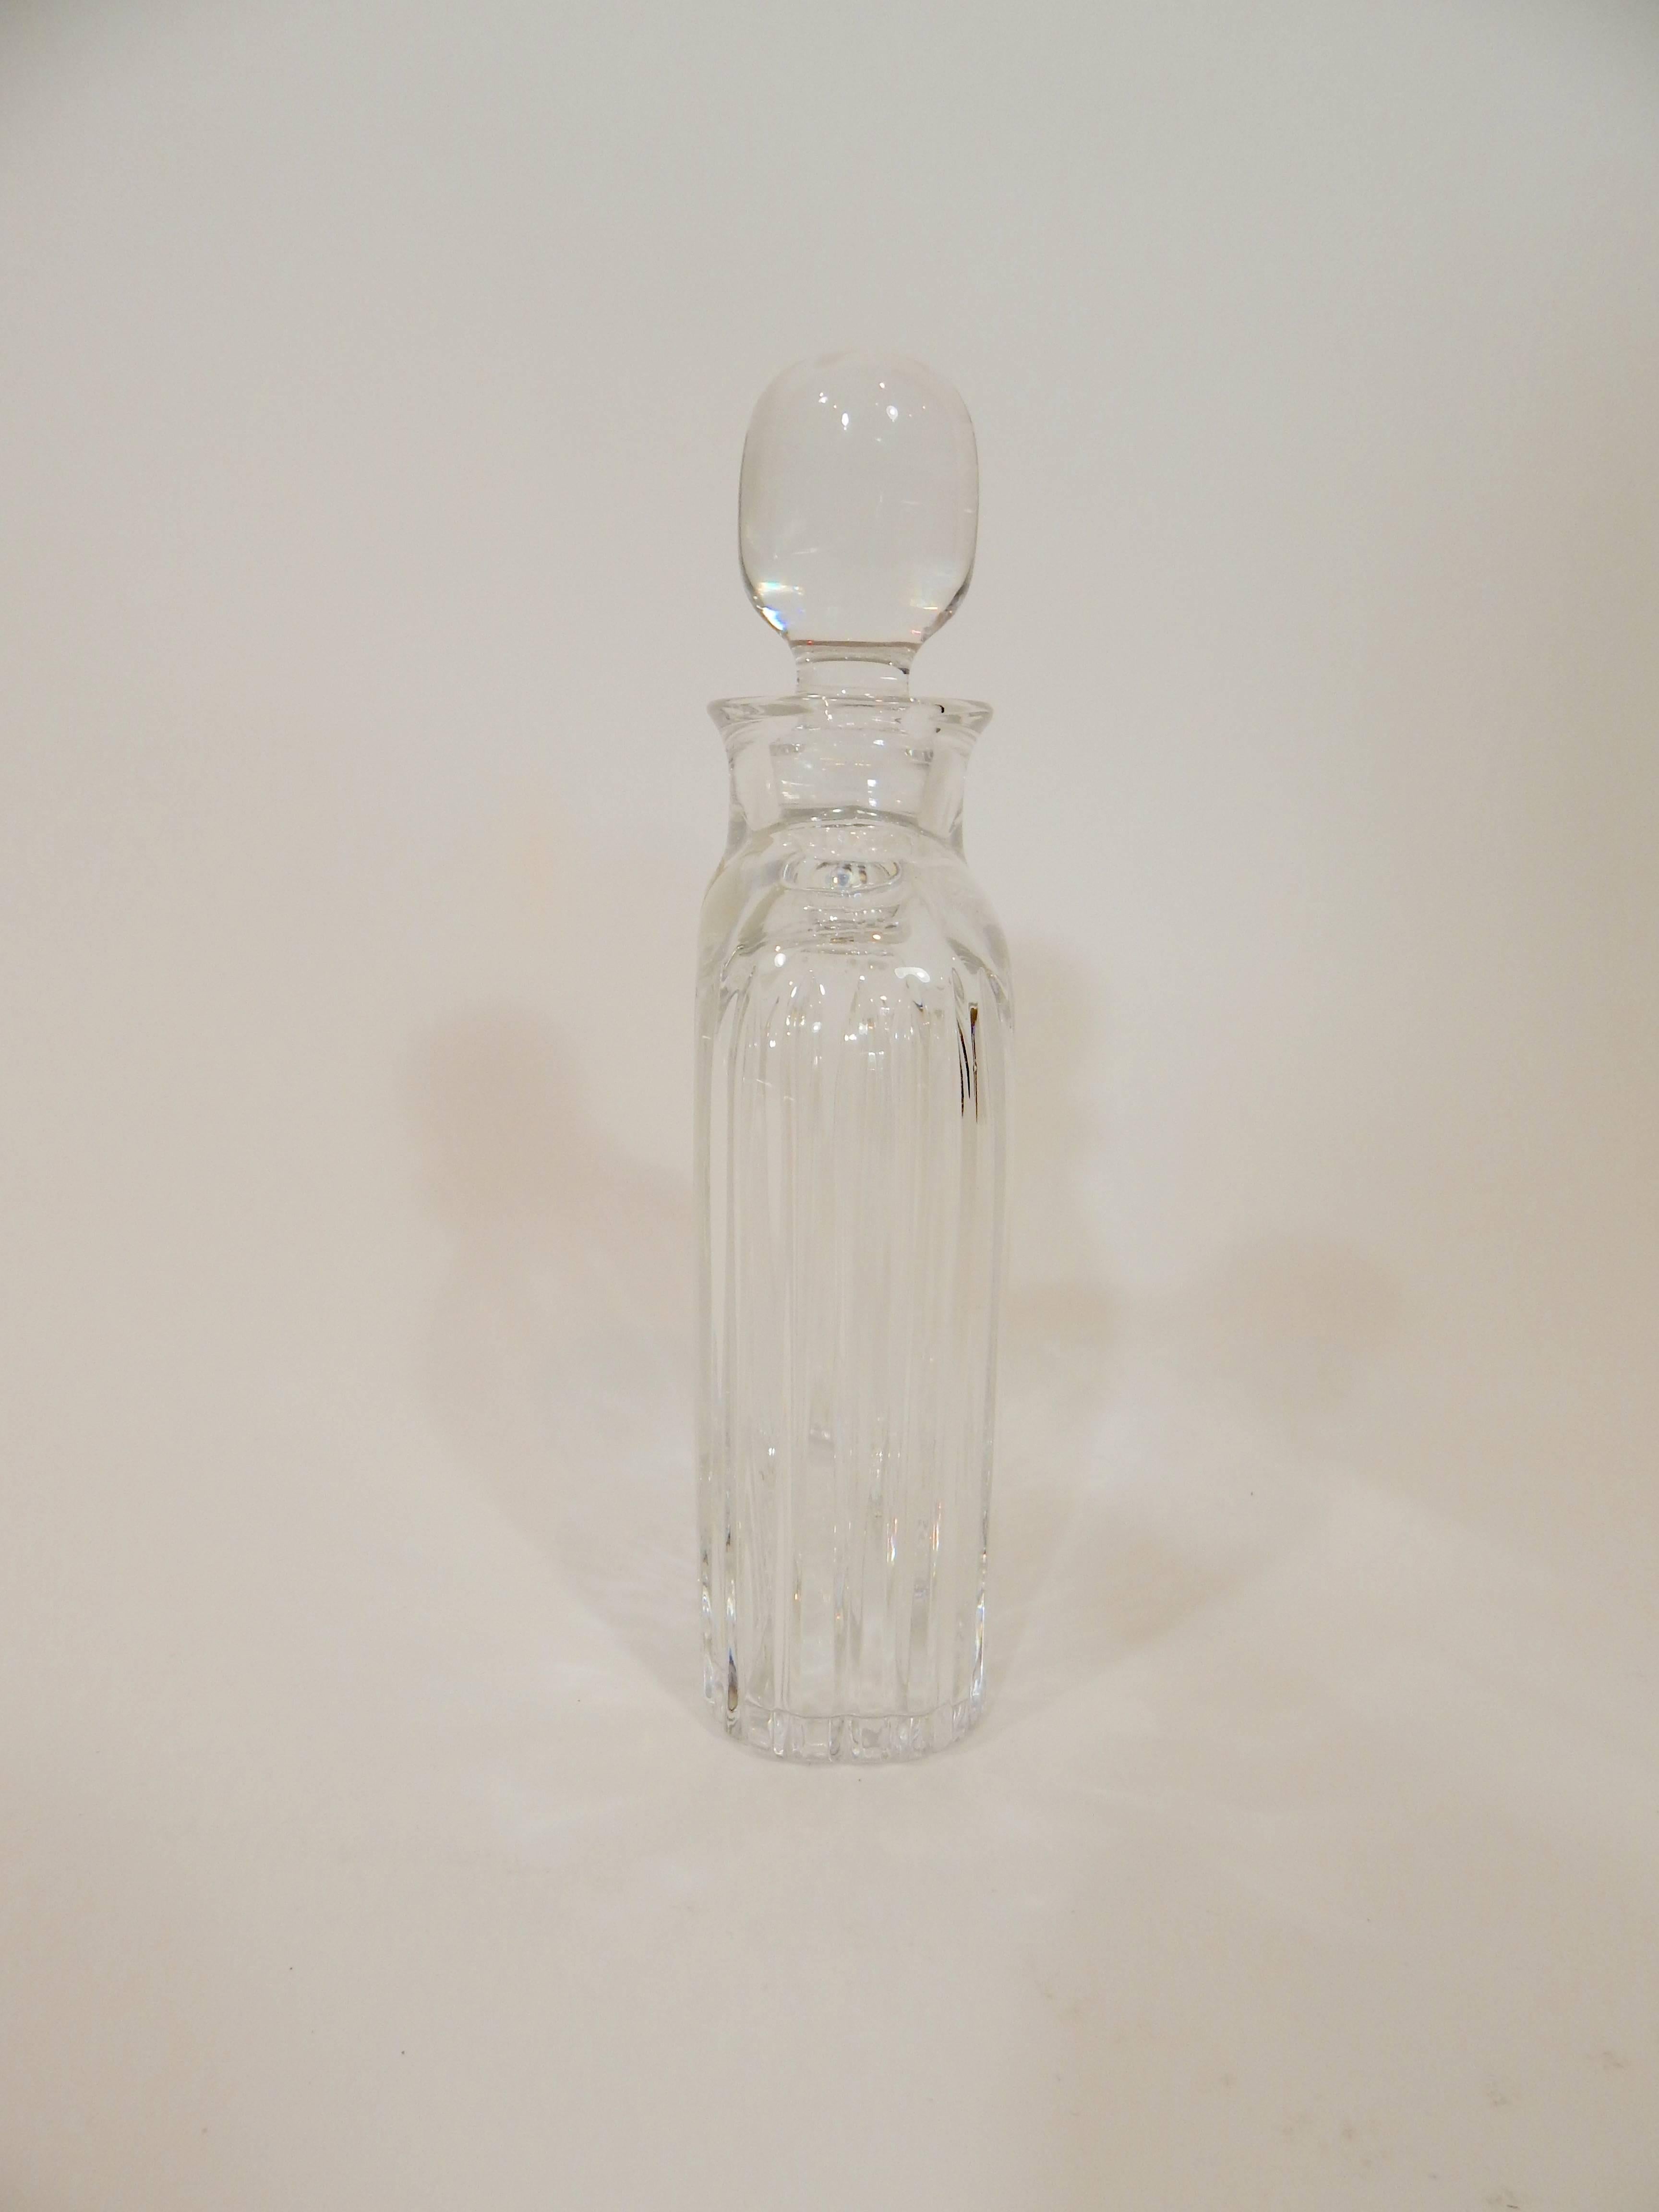 Crystal decanter. Never used. Excellent condition. Still retains original stamp.
A vintage midcentury 1960s-1970s Atlantis Sonnet cut lead crystal whiskey decanter with sharply defined vertical cuts that brilliantly capture and refract light.